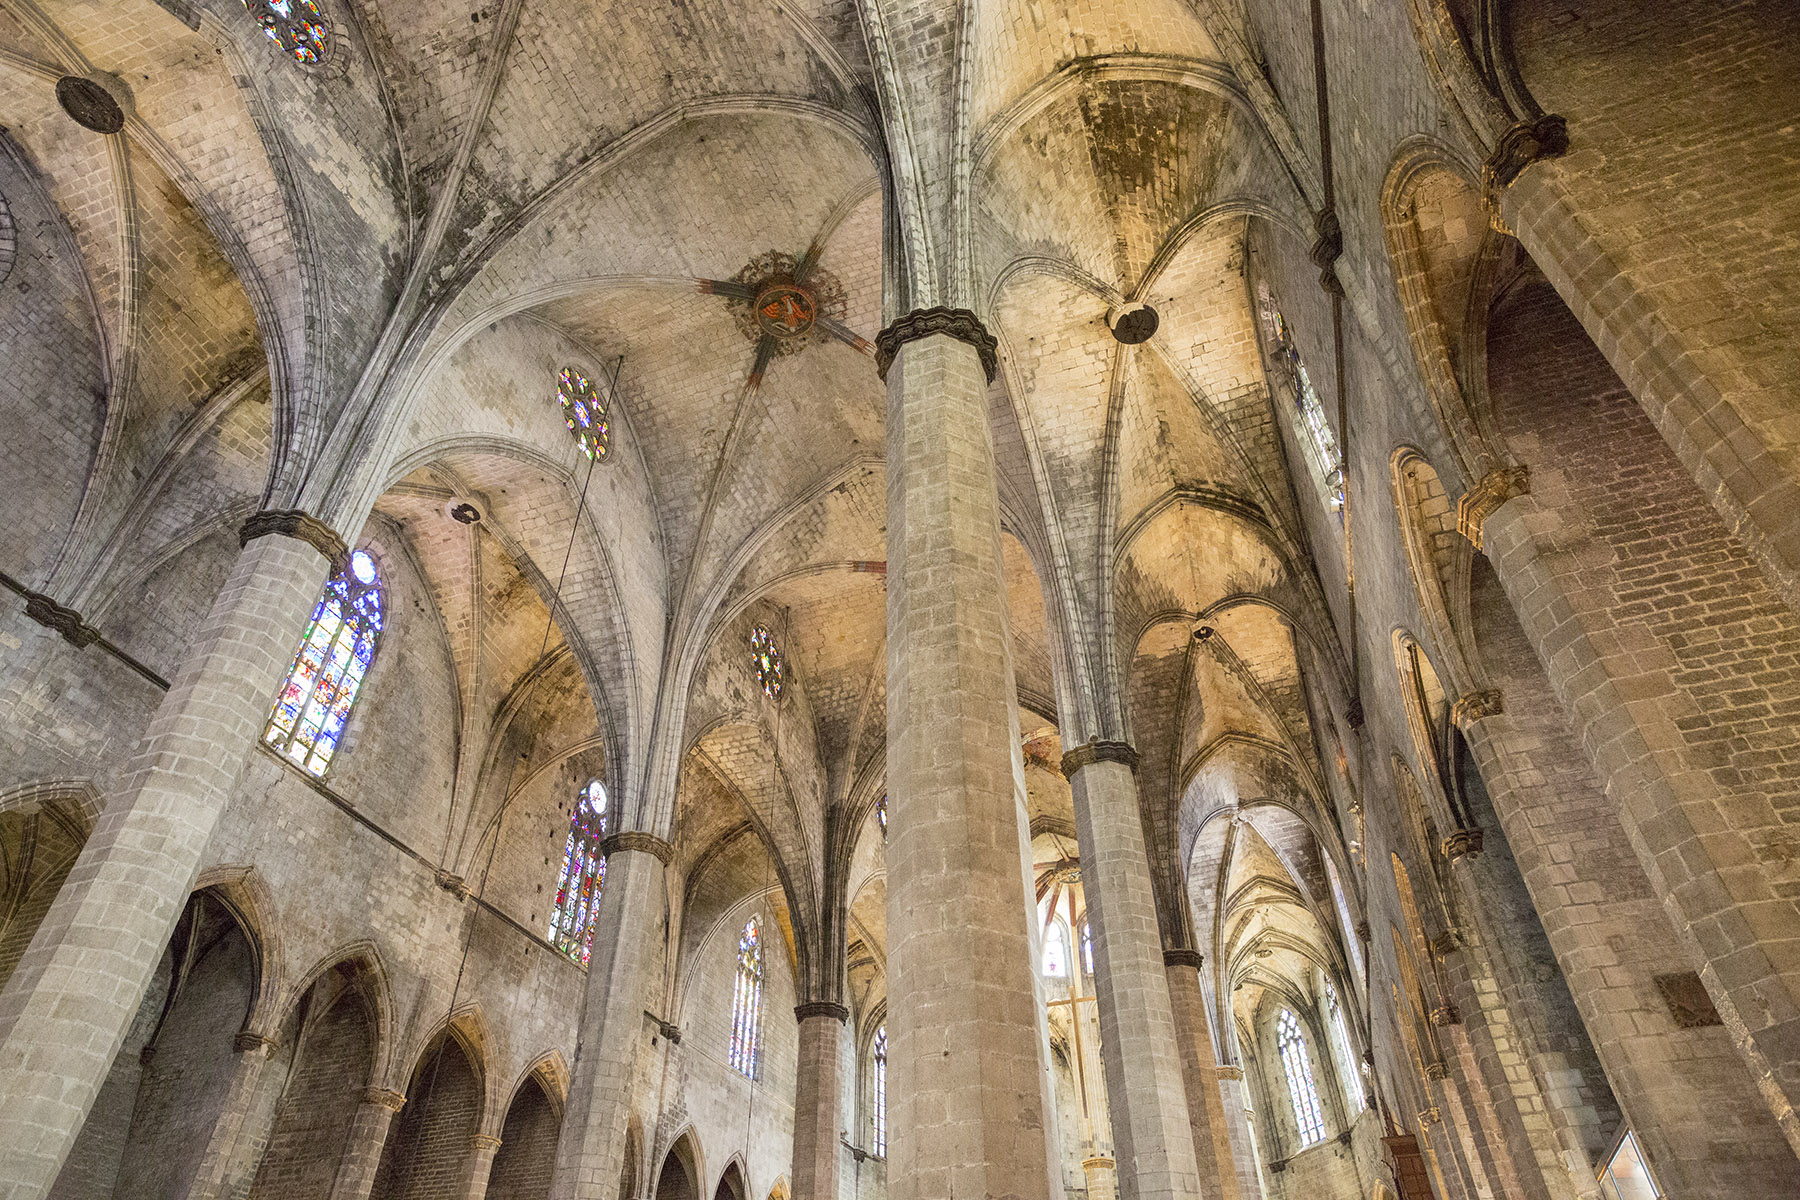 Cathedral of the sea in Barcelona 1329-1383)